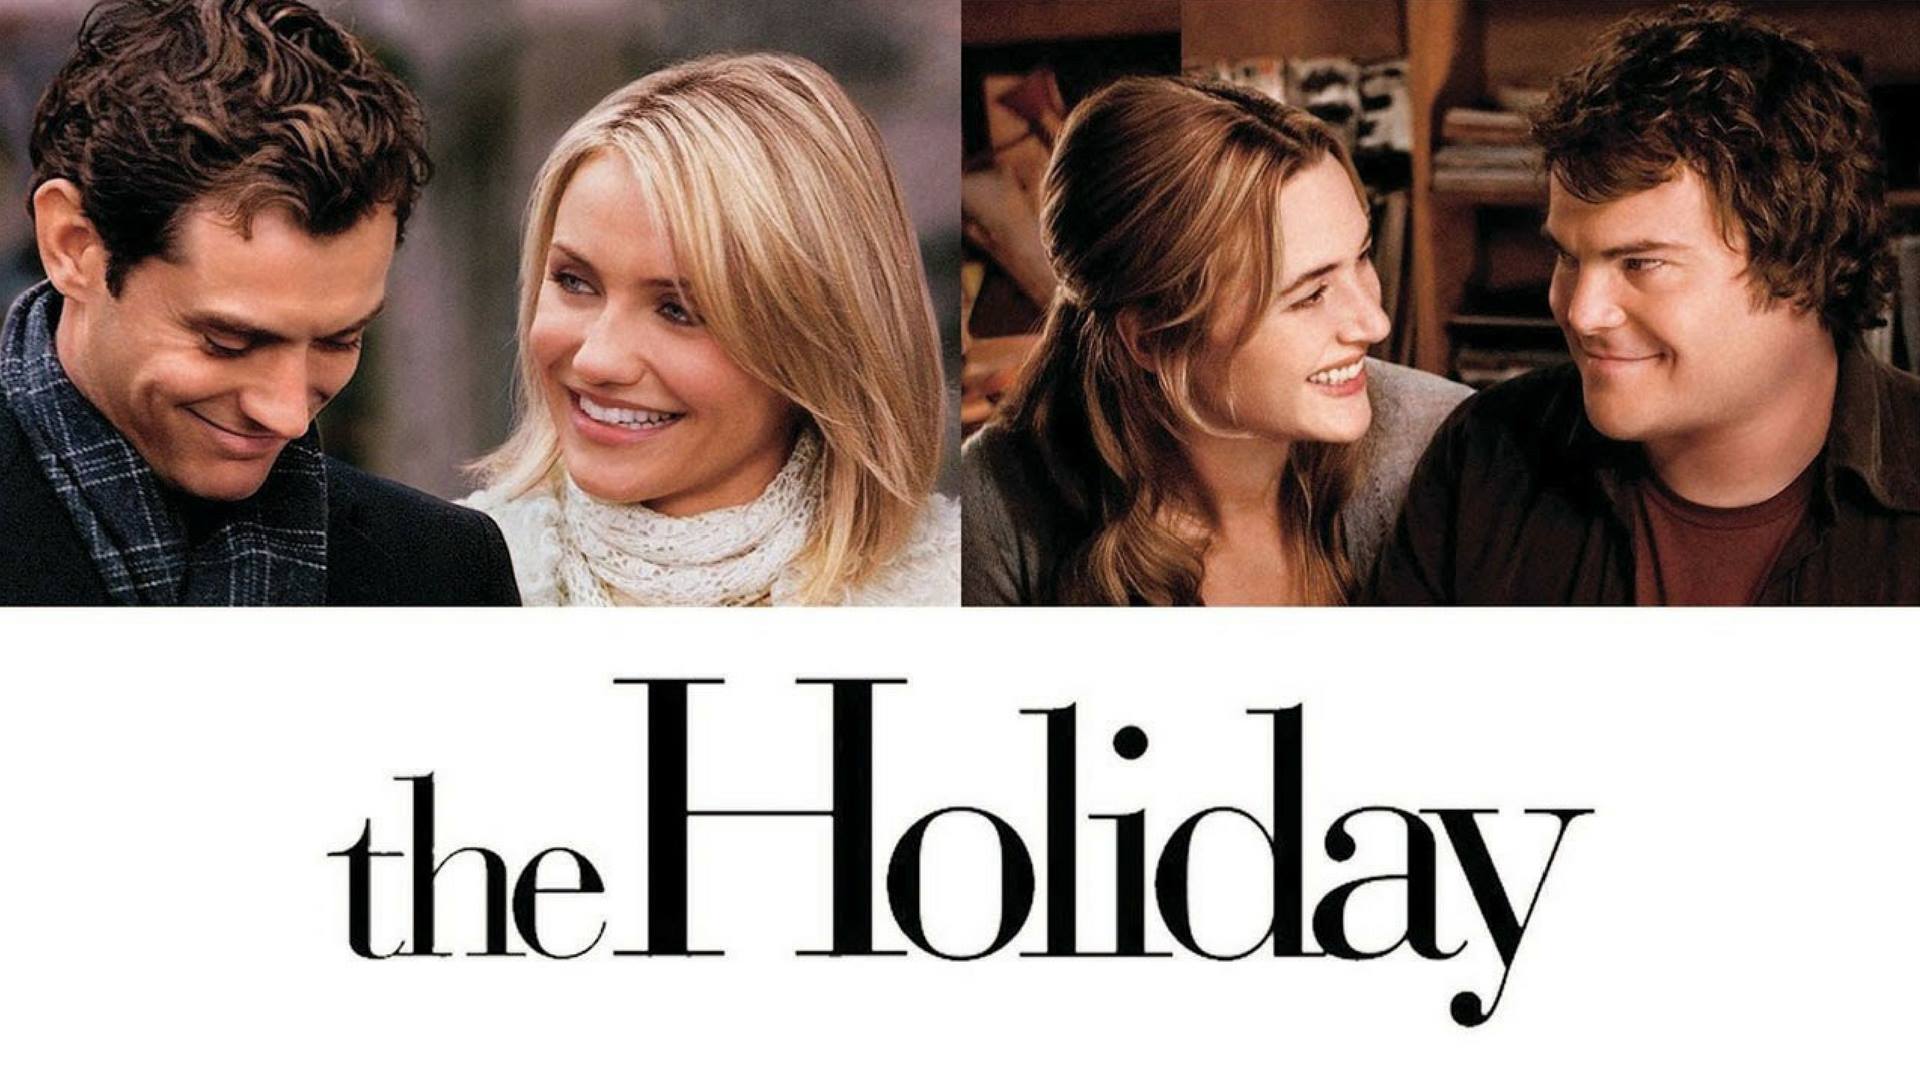 Where Was "The Holiday" Filmed? All Filming Locations Revealed